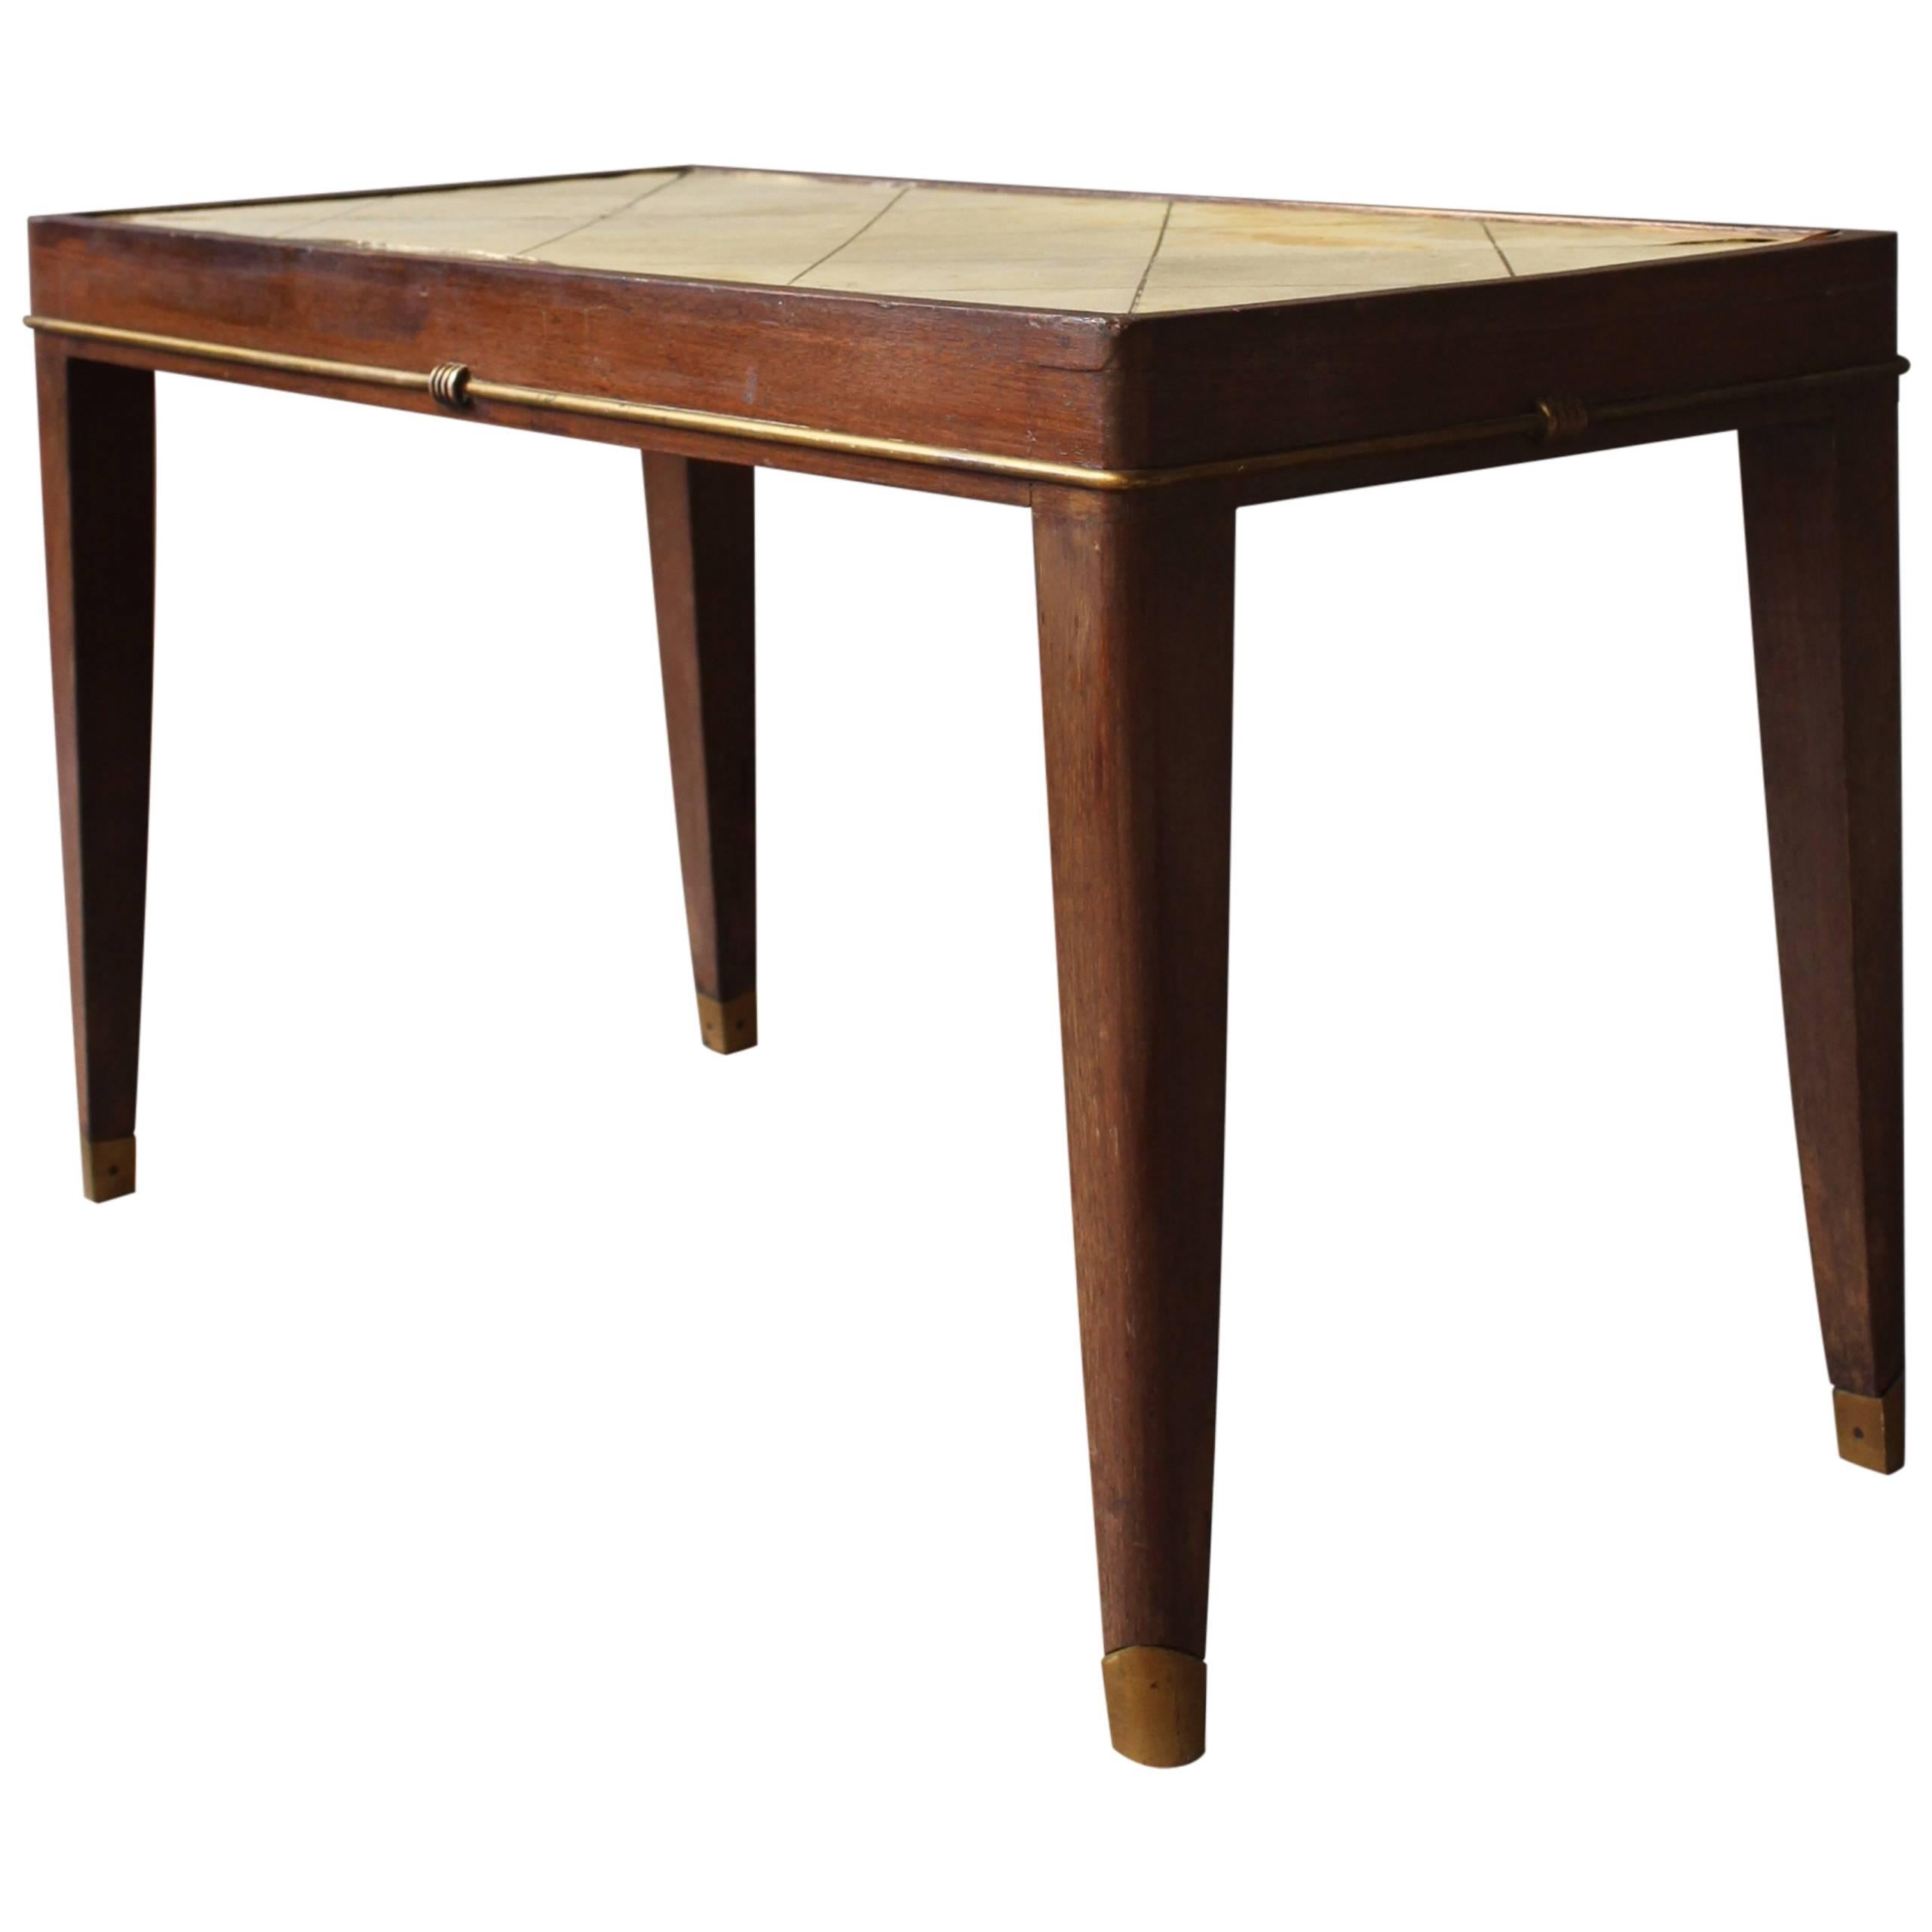 FineFrench Art Deco Rosewood Coffee Table with a Parchment Top and Bronze Detail